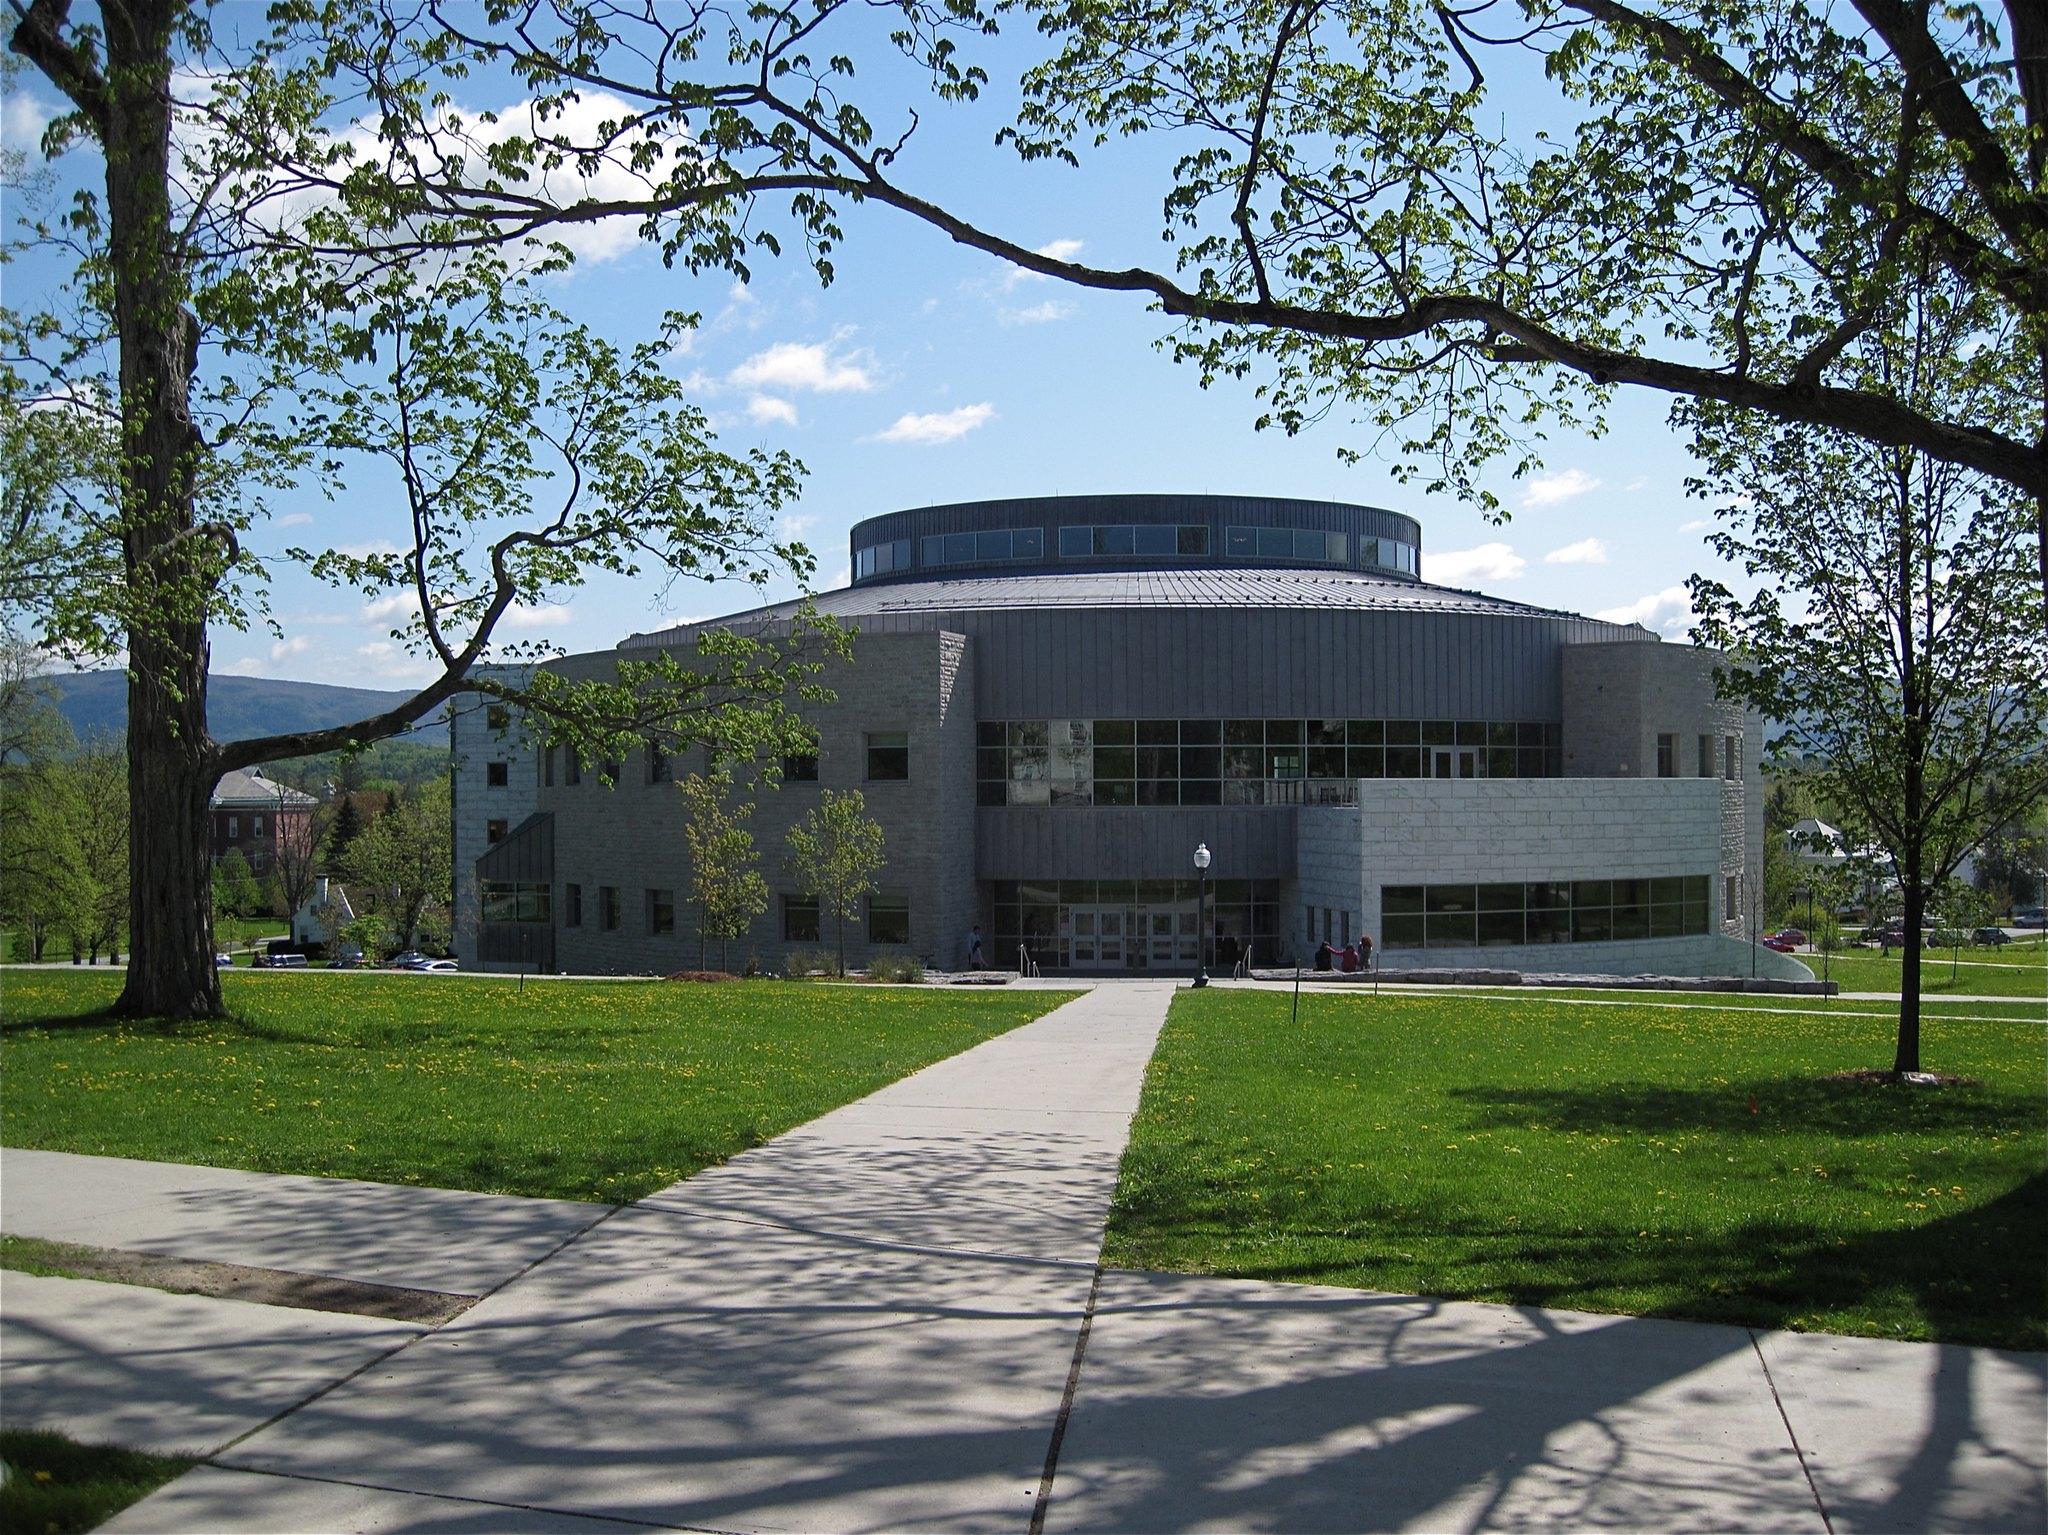 A fine structure at Middlebury College in Vermont, one of the most beautiful college campuses, circular in shape and surrounded by patterned pathways and green lawn